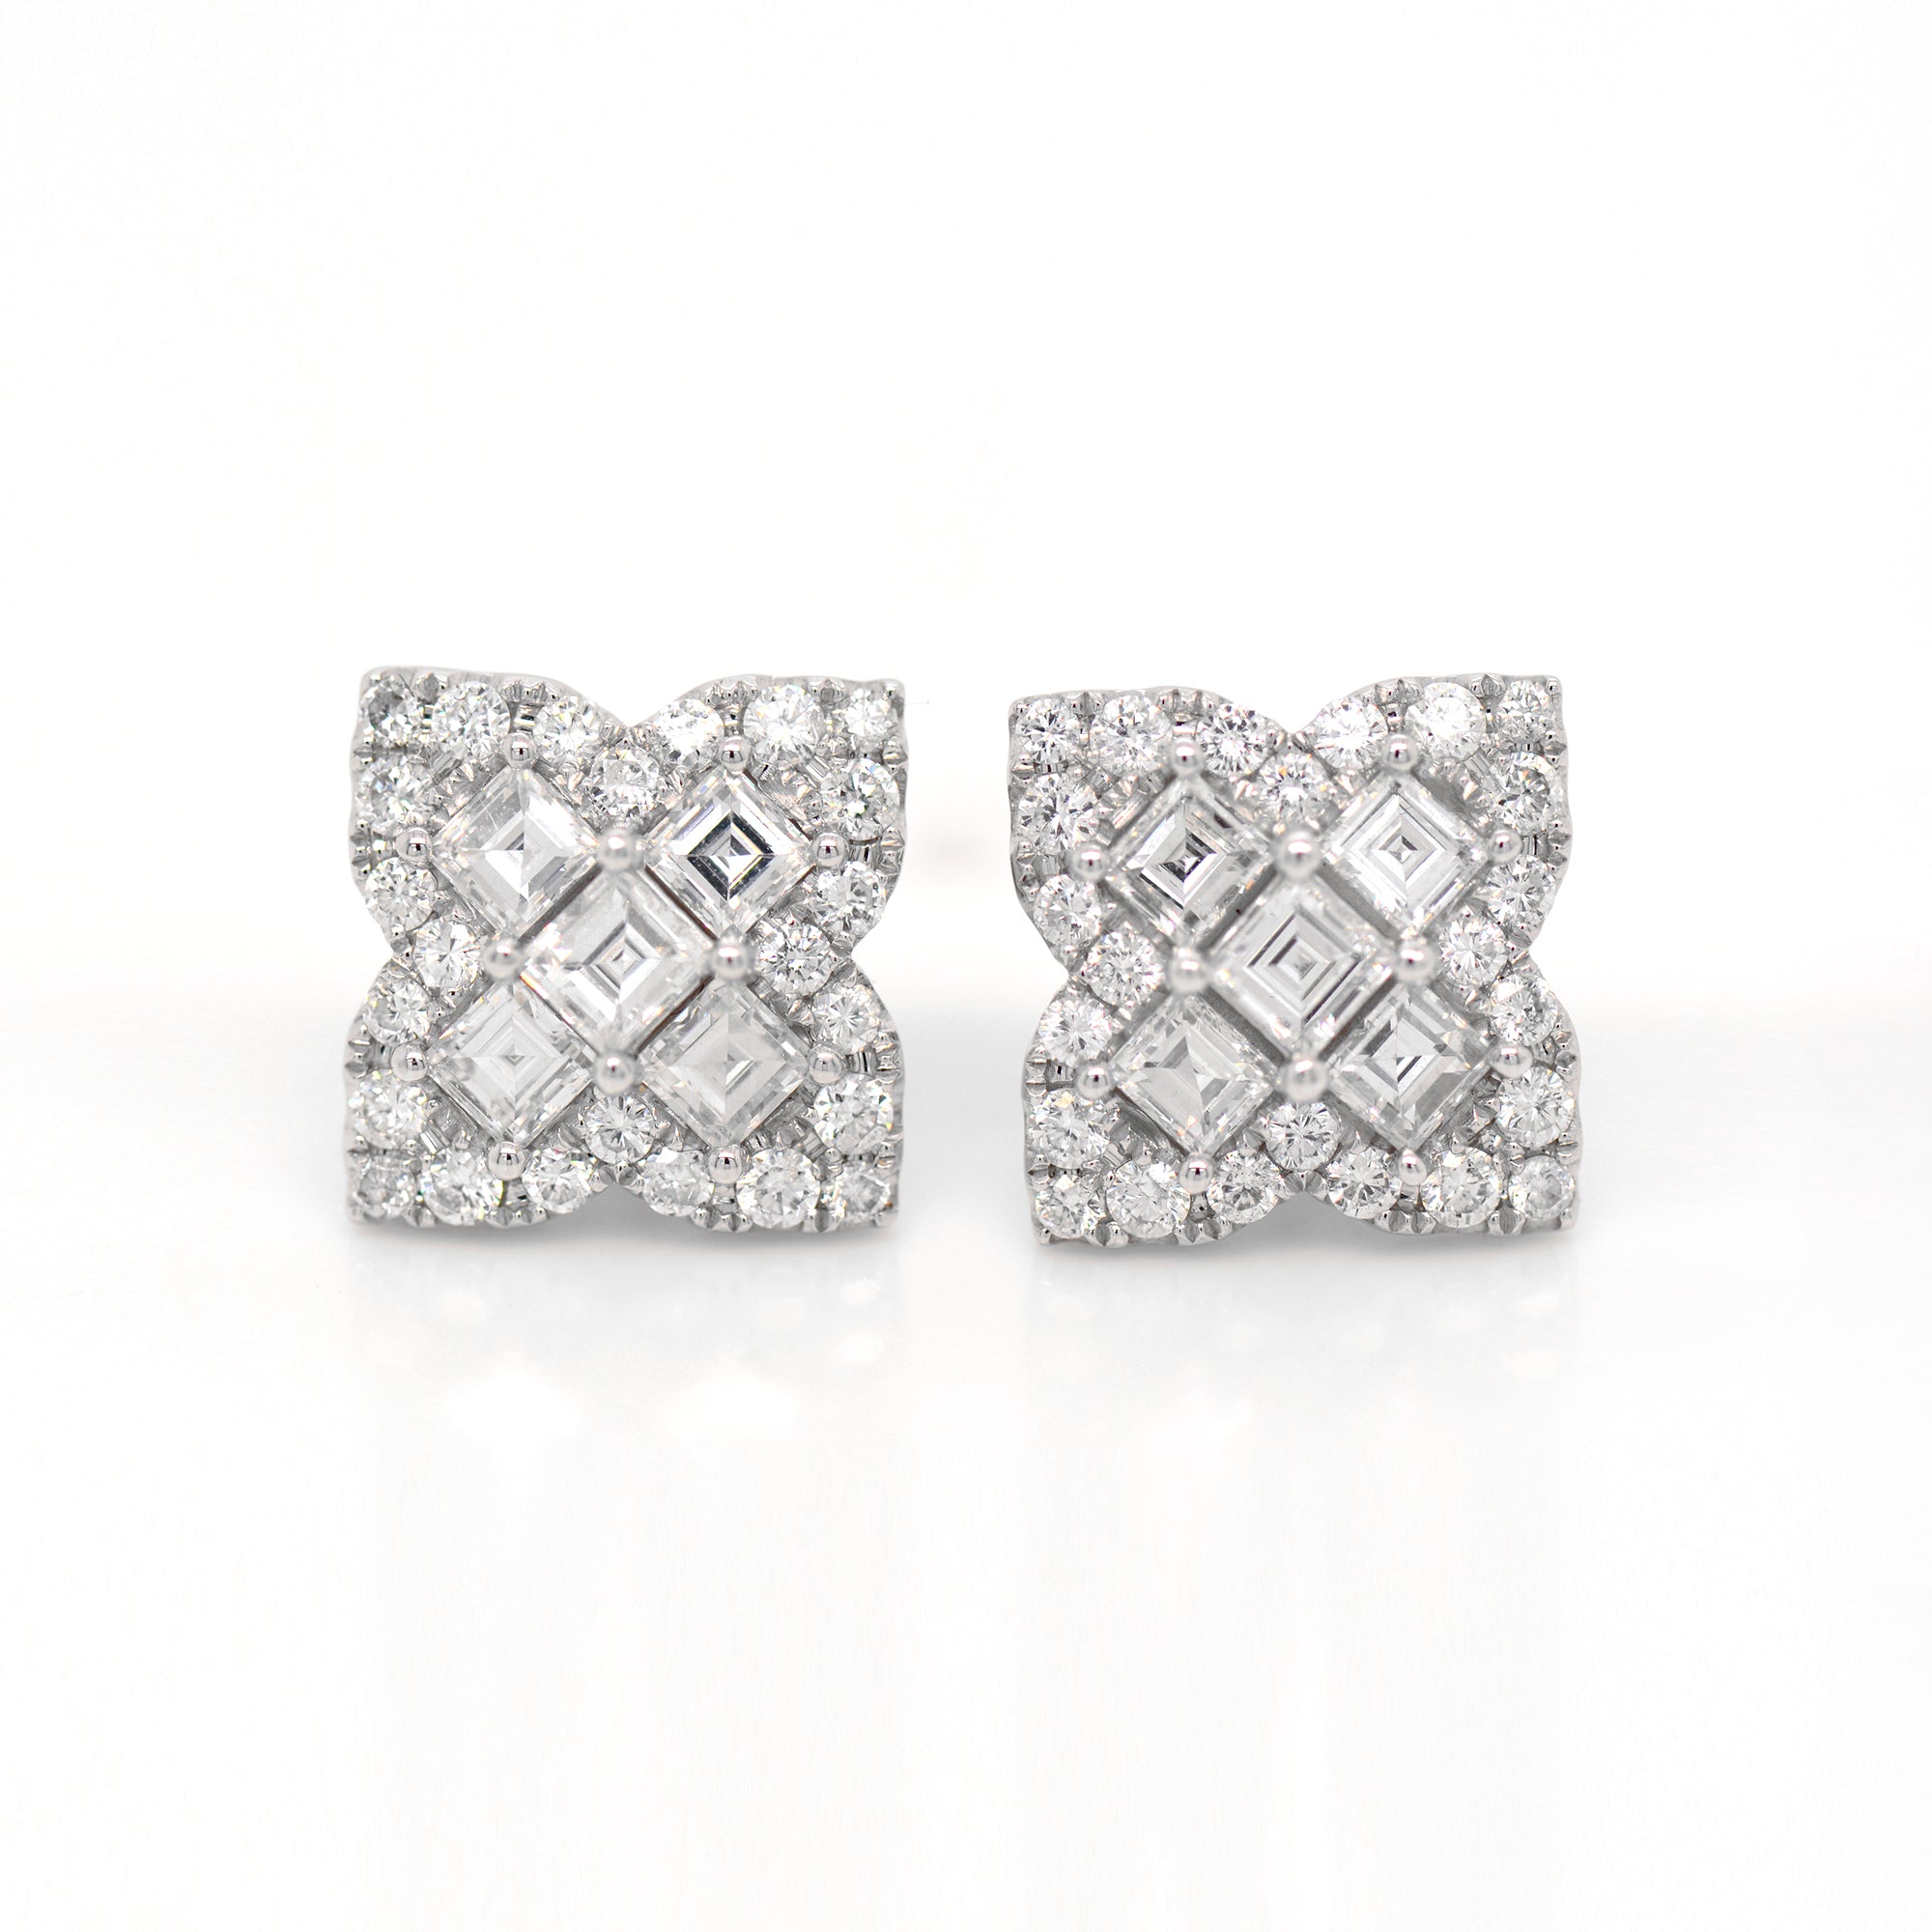 18K white gold diamond earrings feature Asscher and round diamonds weighing a total of 2.69 carats set in a 4-point clover design.